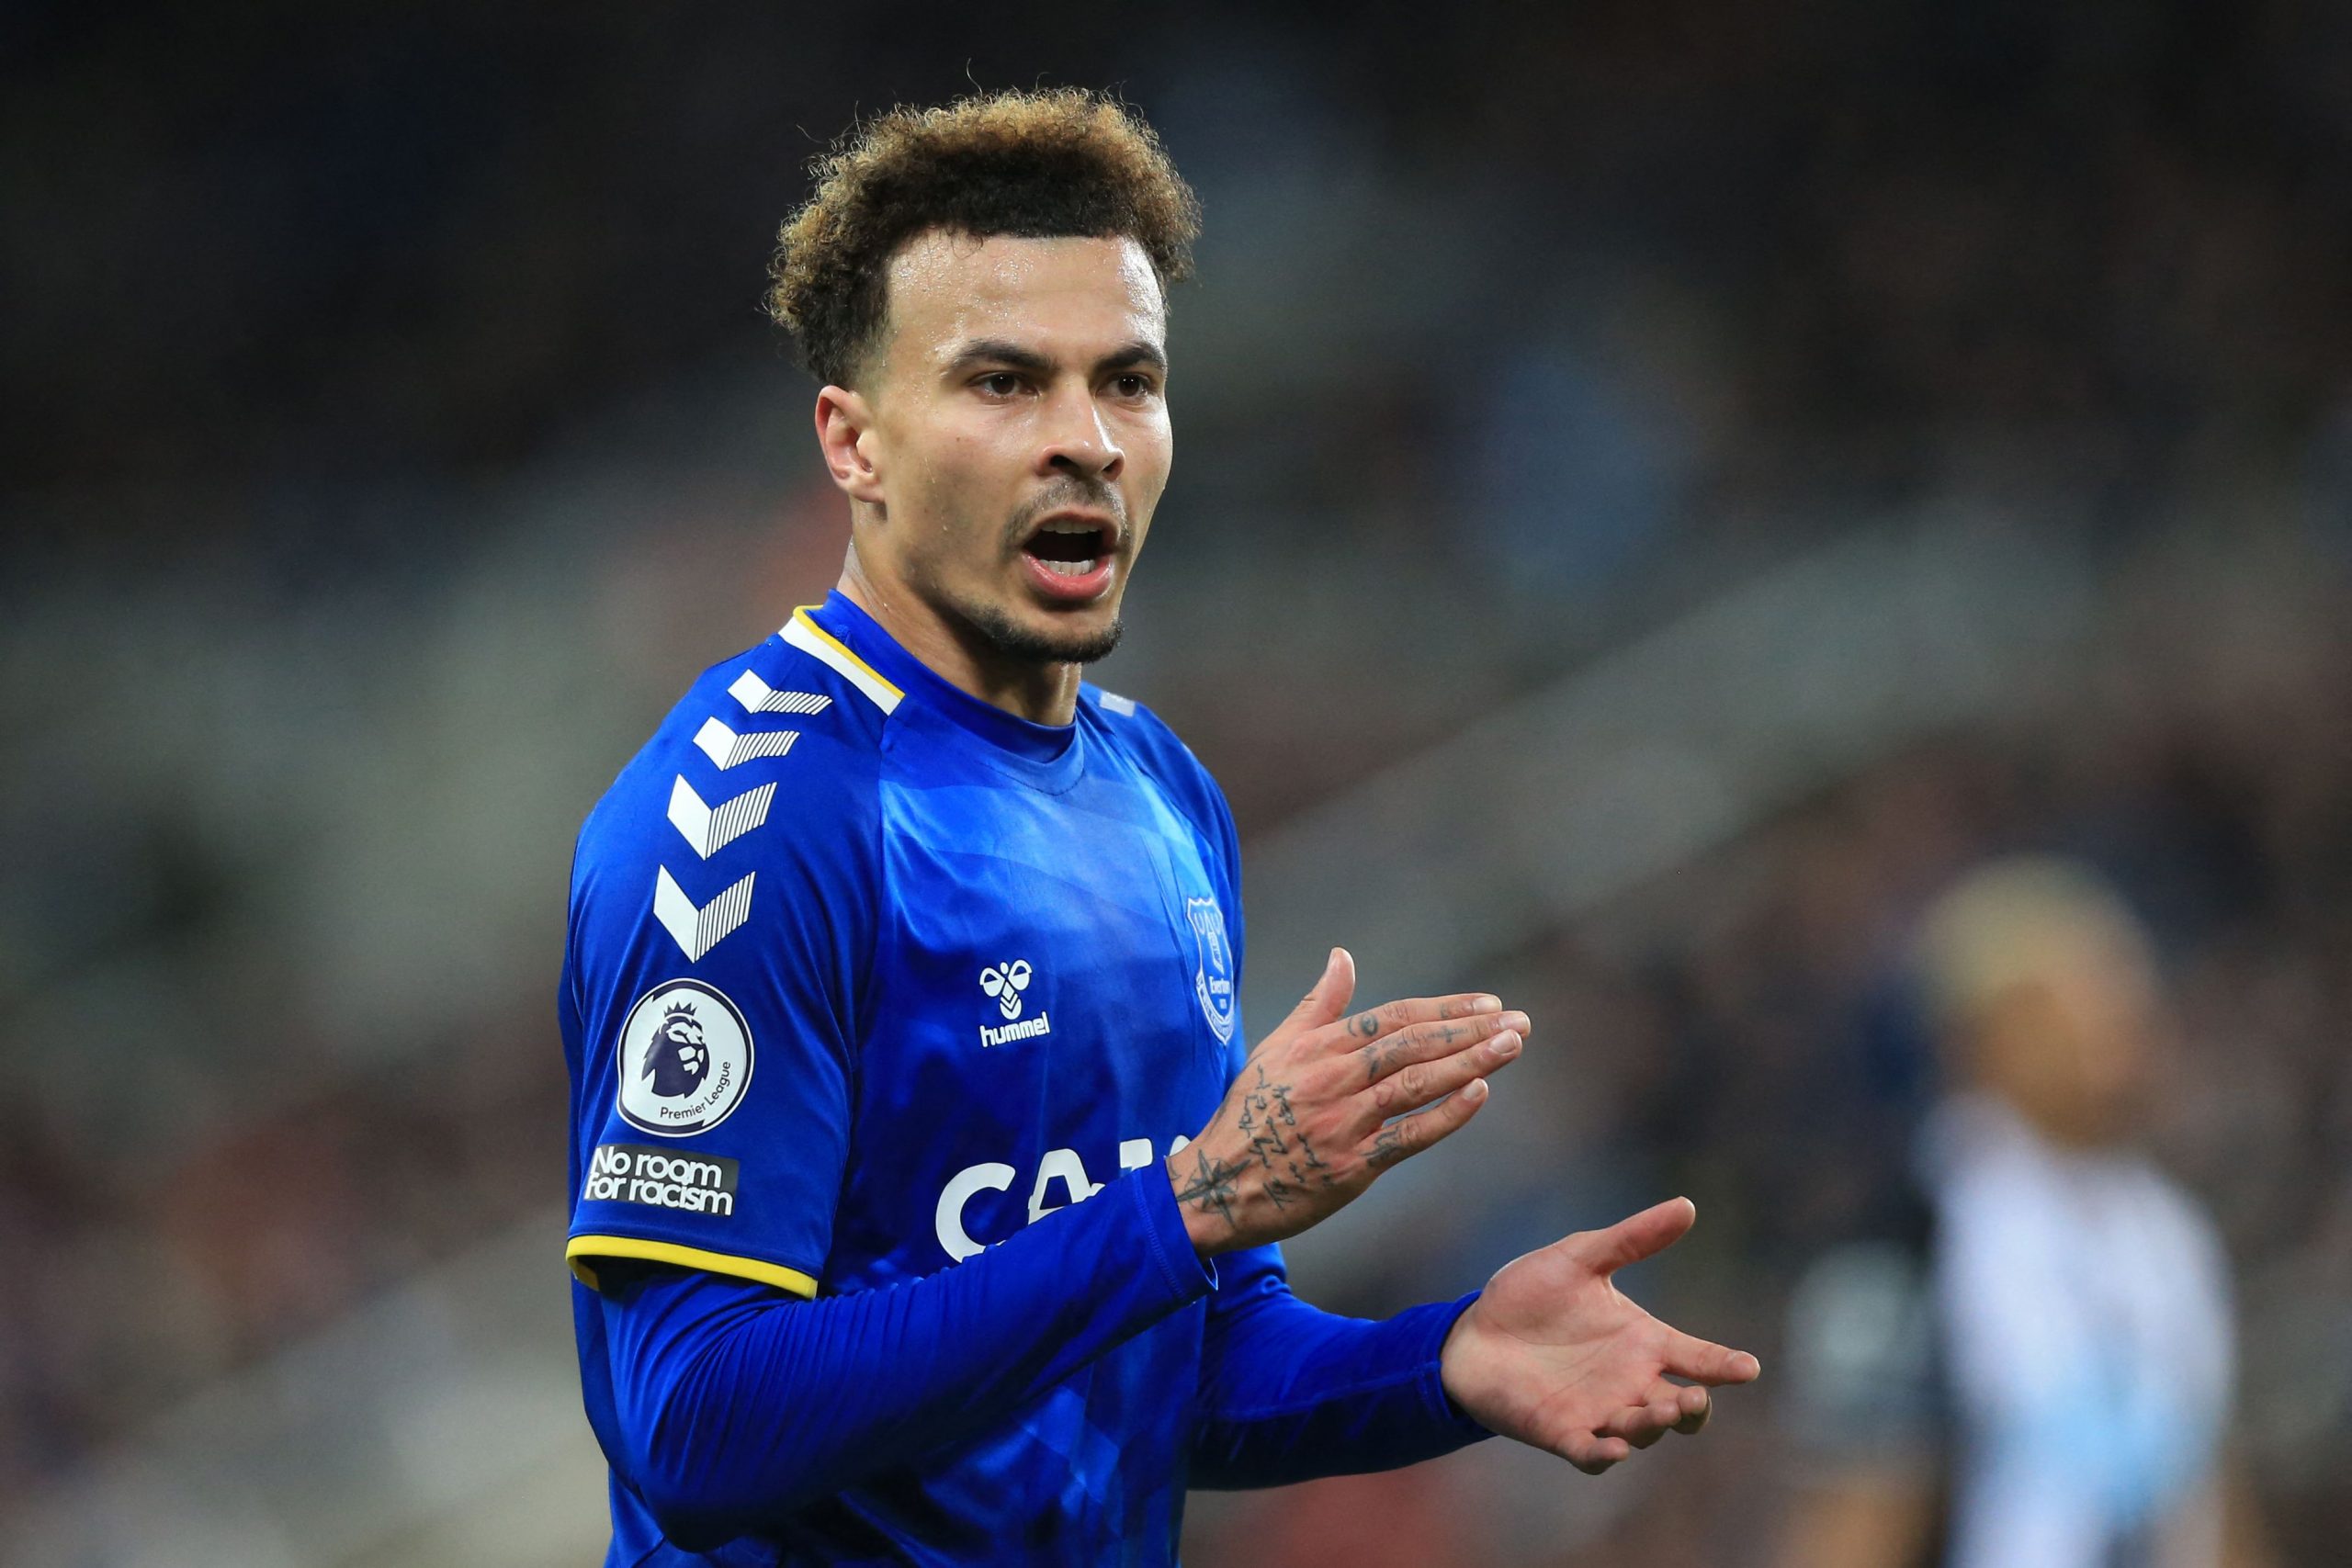 Tottenham Hotspur could face a £10million loss if Everton cut ties with Dele Alli.